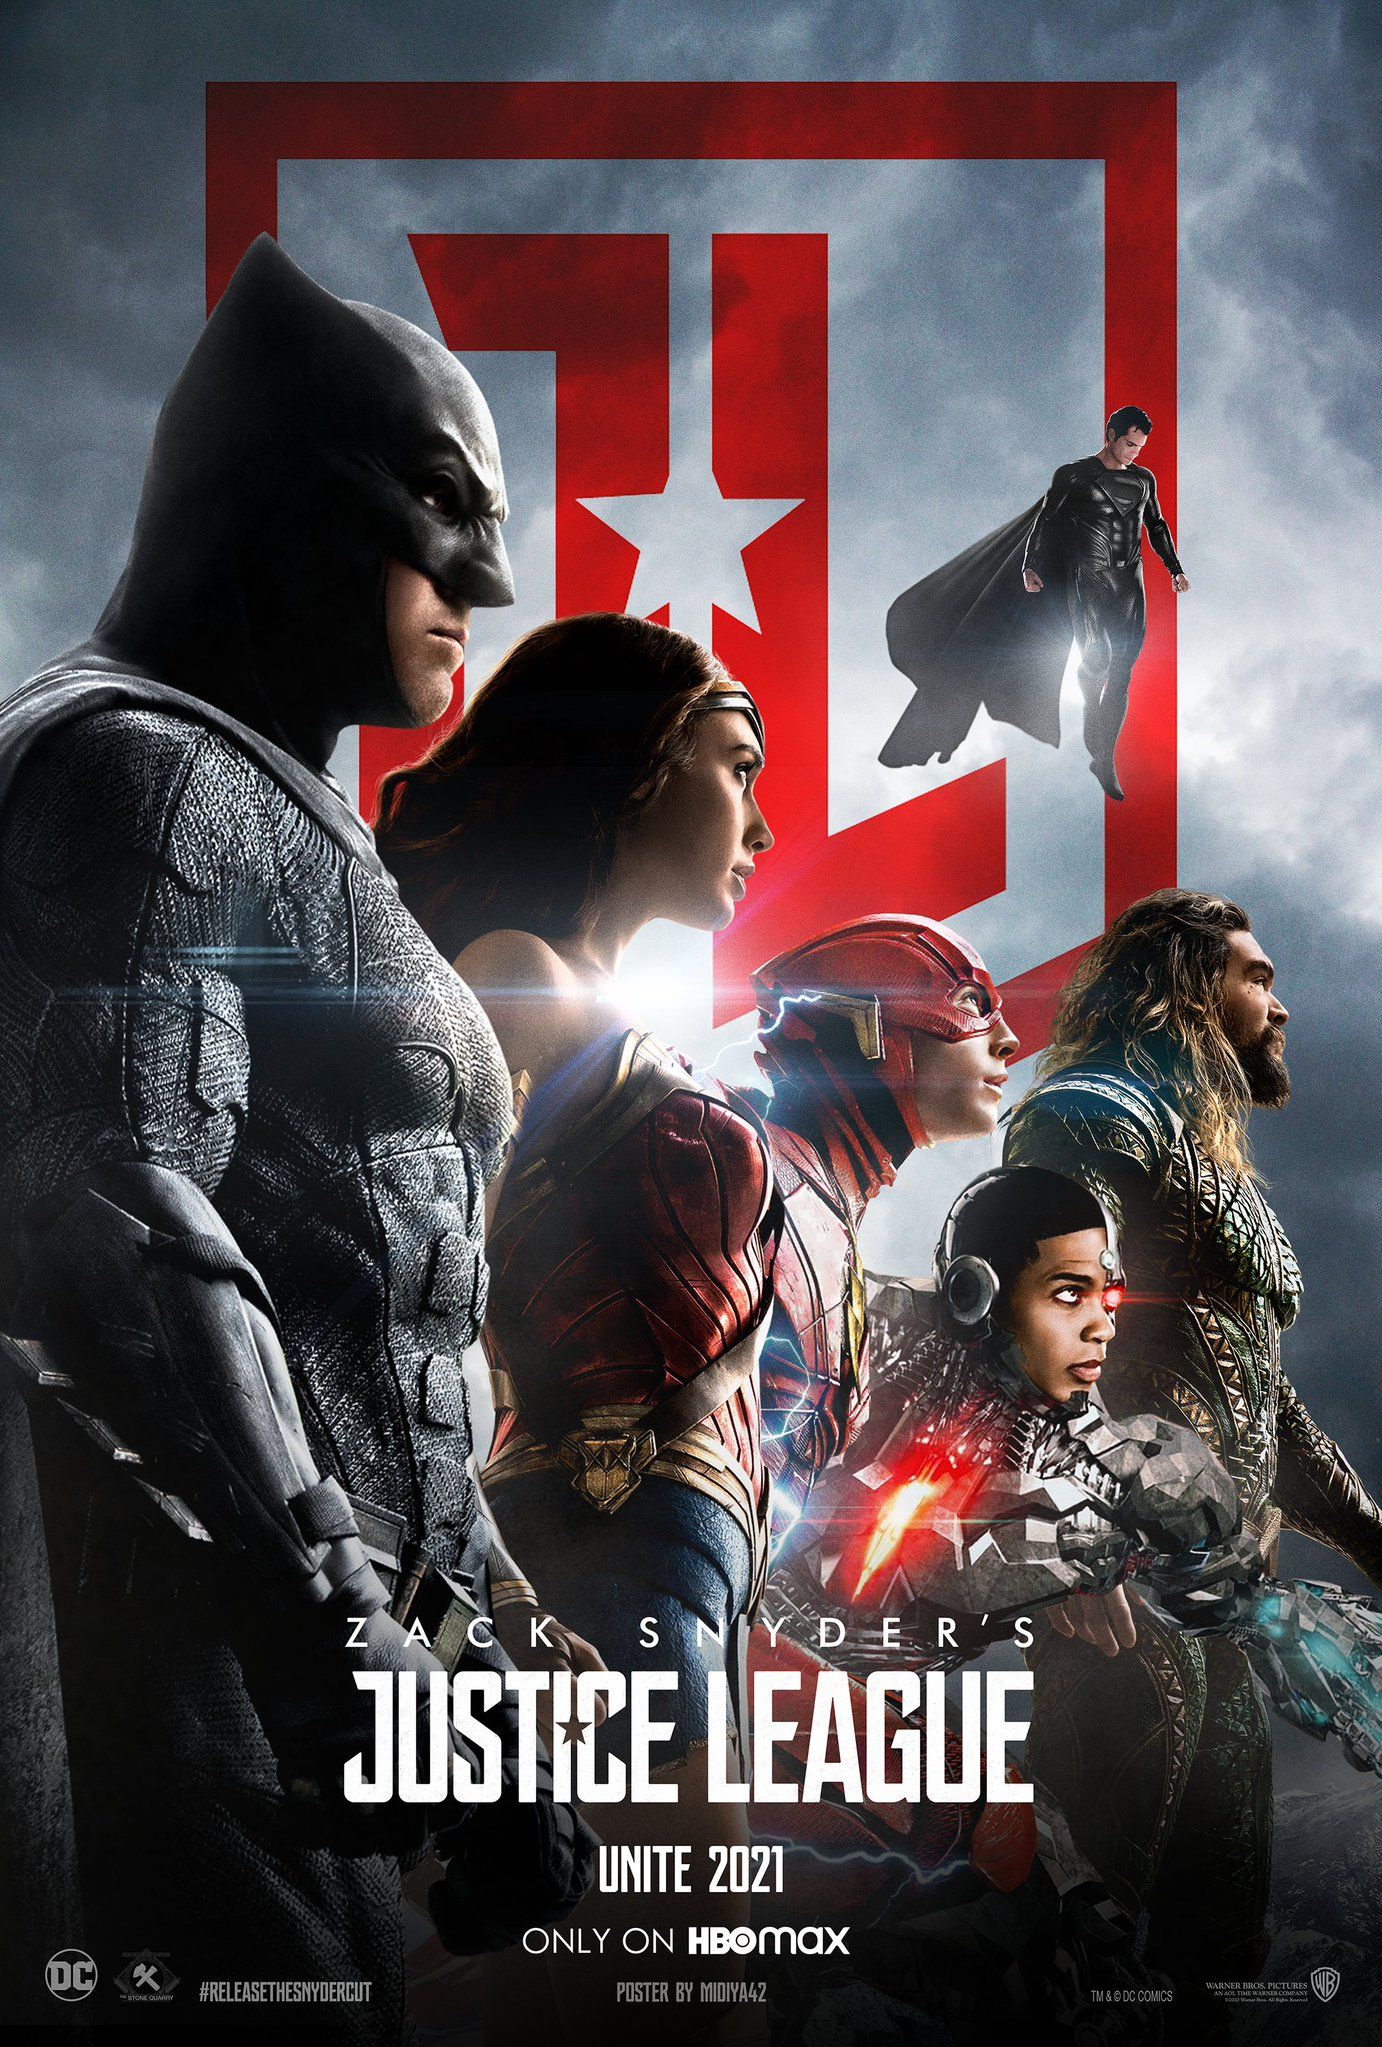 FANMADE: Zack Snyder's Justice League poster by midiya42, DC_Cinematic